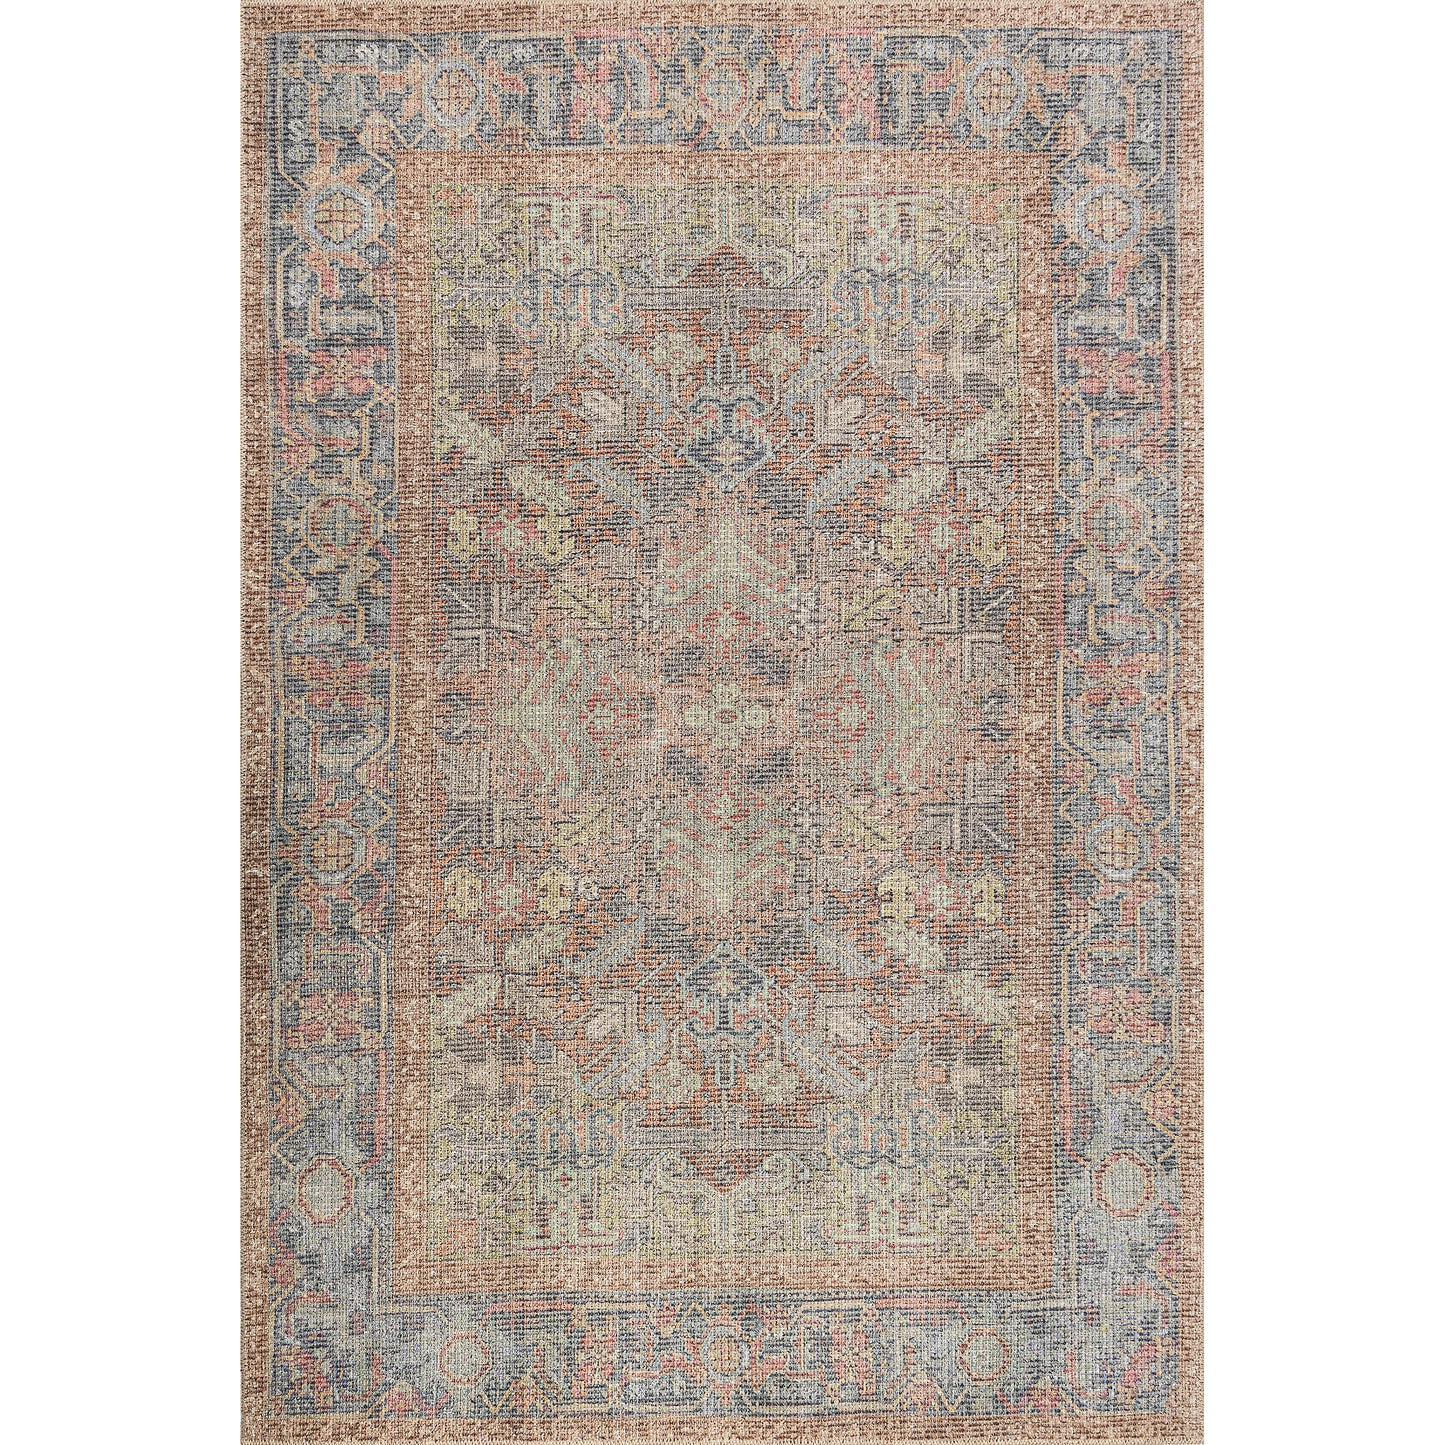 multicolor bordered cotton and polyster machine washable traditional rustic area rug 2x5, 3x5 Runner Rug, Entry Way, Entrance, Balcony, Bedside, Home Office, Table Top